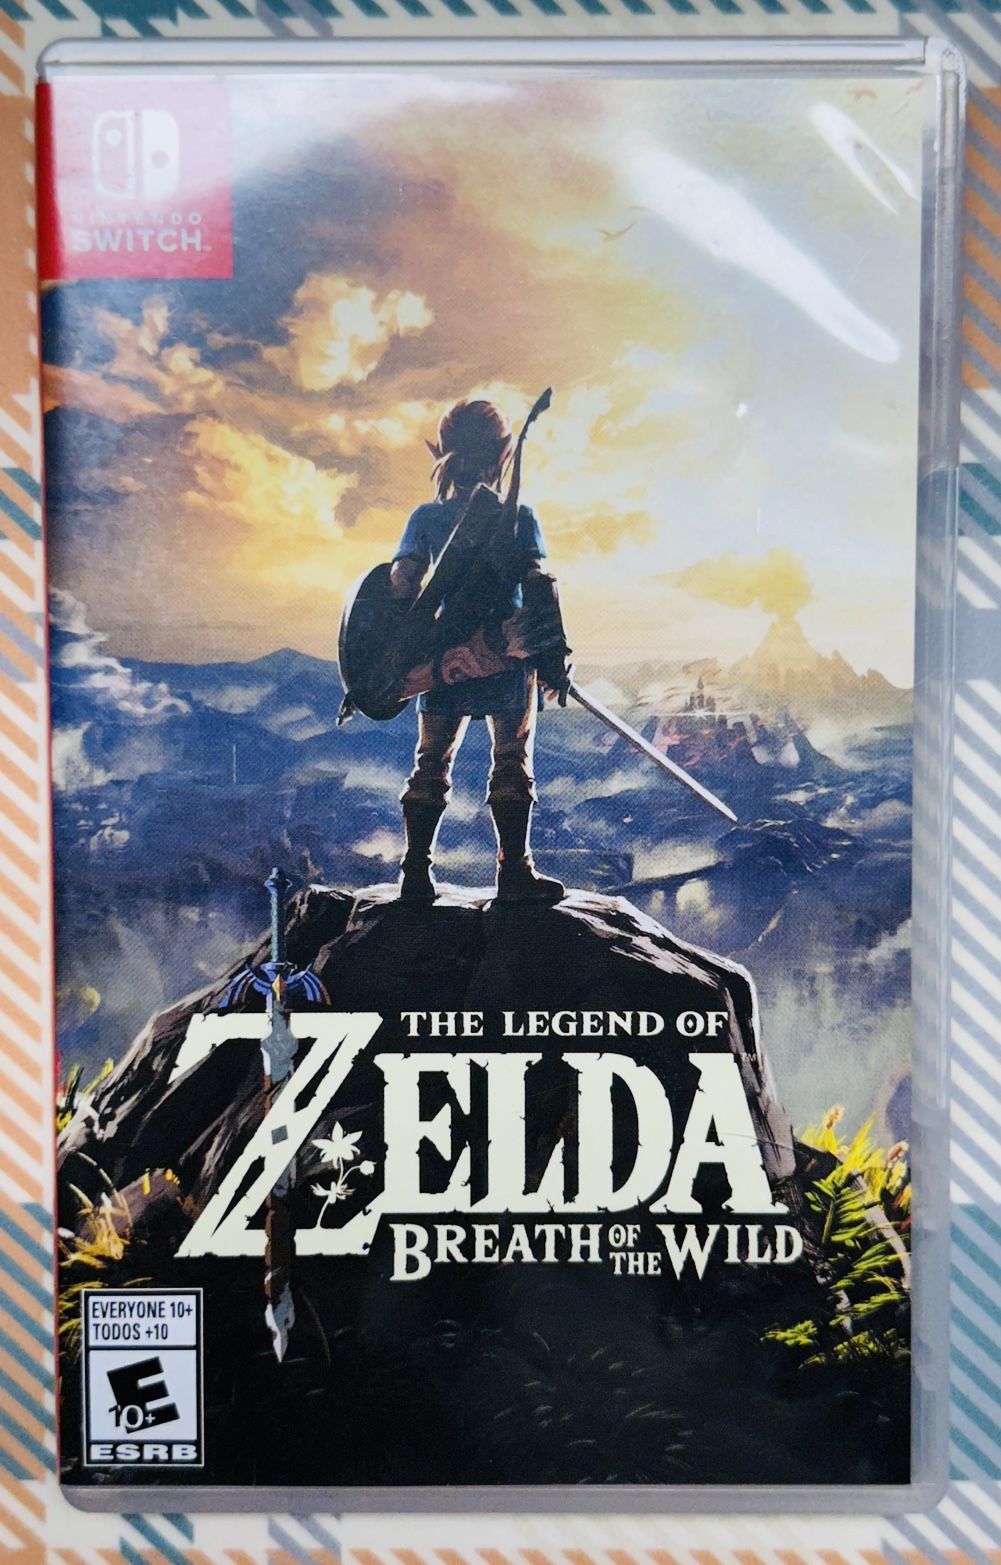 The Legend Of Zelda Breath Of The Wild Nintendo Switch Video Game TESTED Good